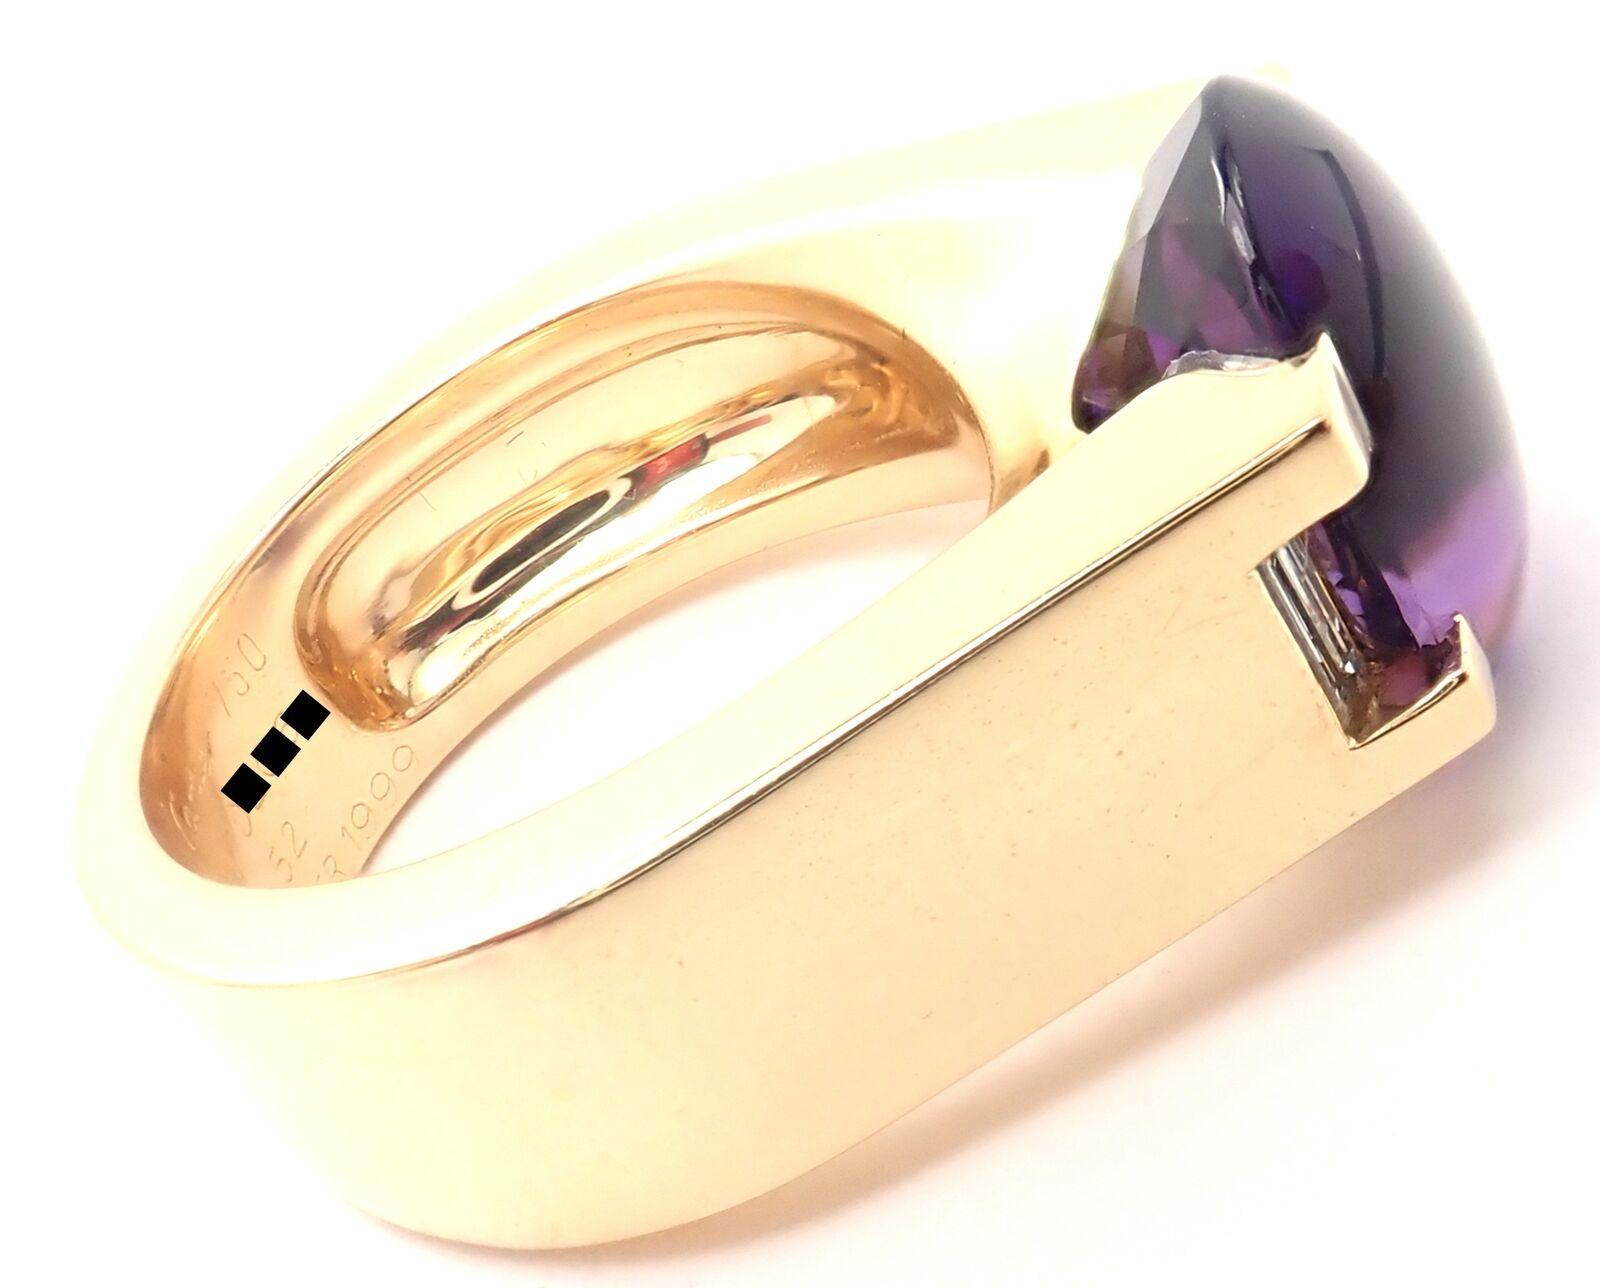 18k Yellow Gold Diamond Amethyst Tankissi Large Ring by Cartier.
With 2 baguette cut diamonds VVS1 clarity, G color
1 Oval Amethyst 12mm x 10mm
Details:
Size: European 52, US 6
Weight: 18.2 grams
Width:  12mm
Stamped Hallmarks: Cartier 750